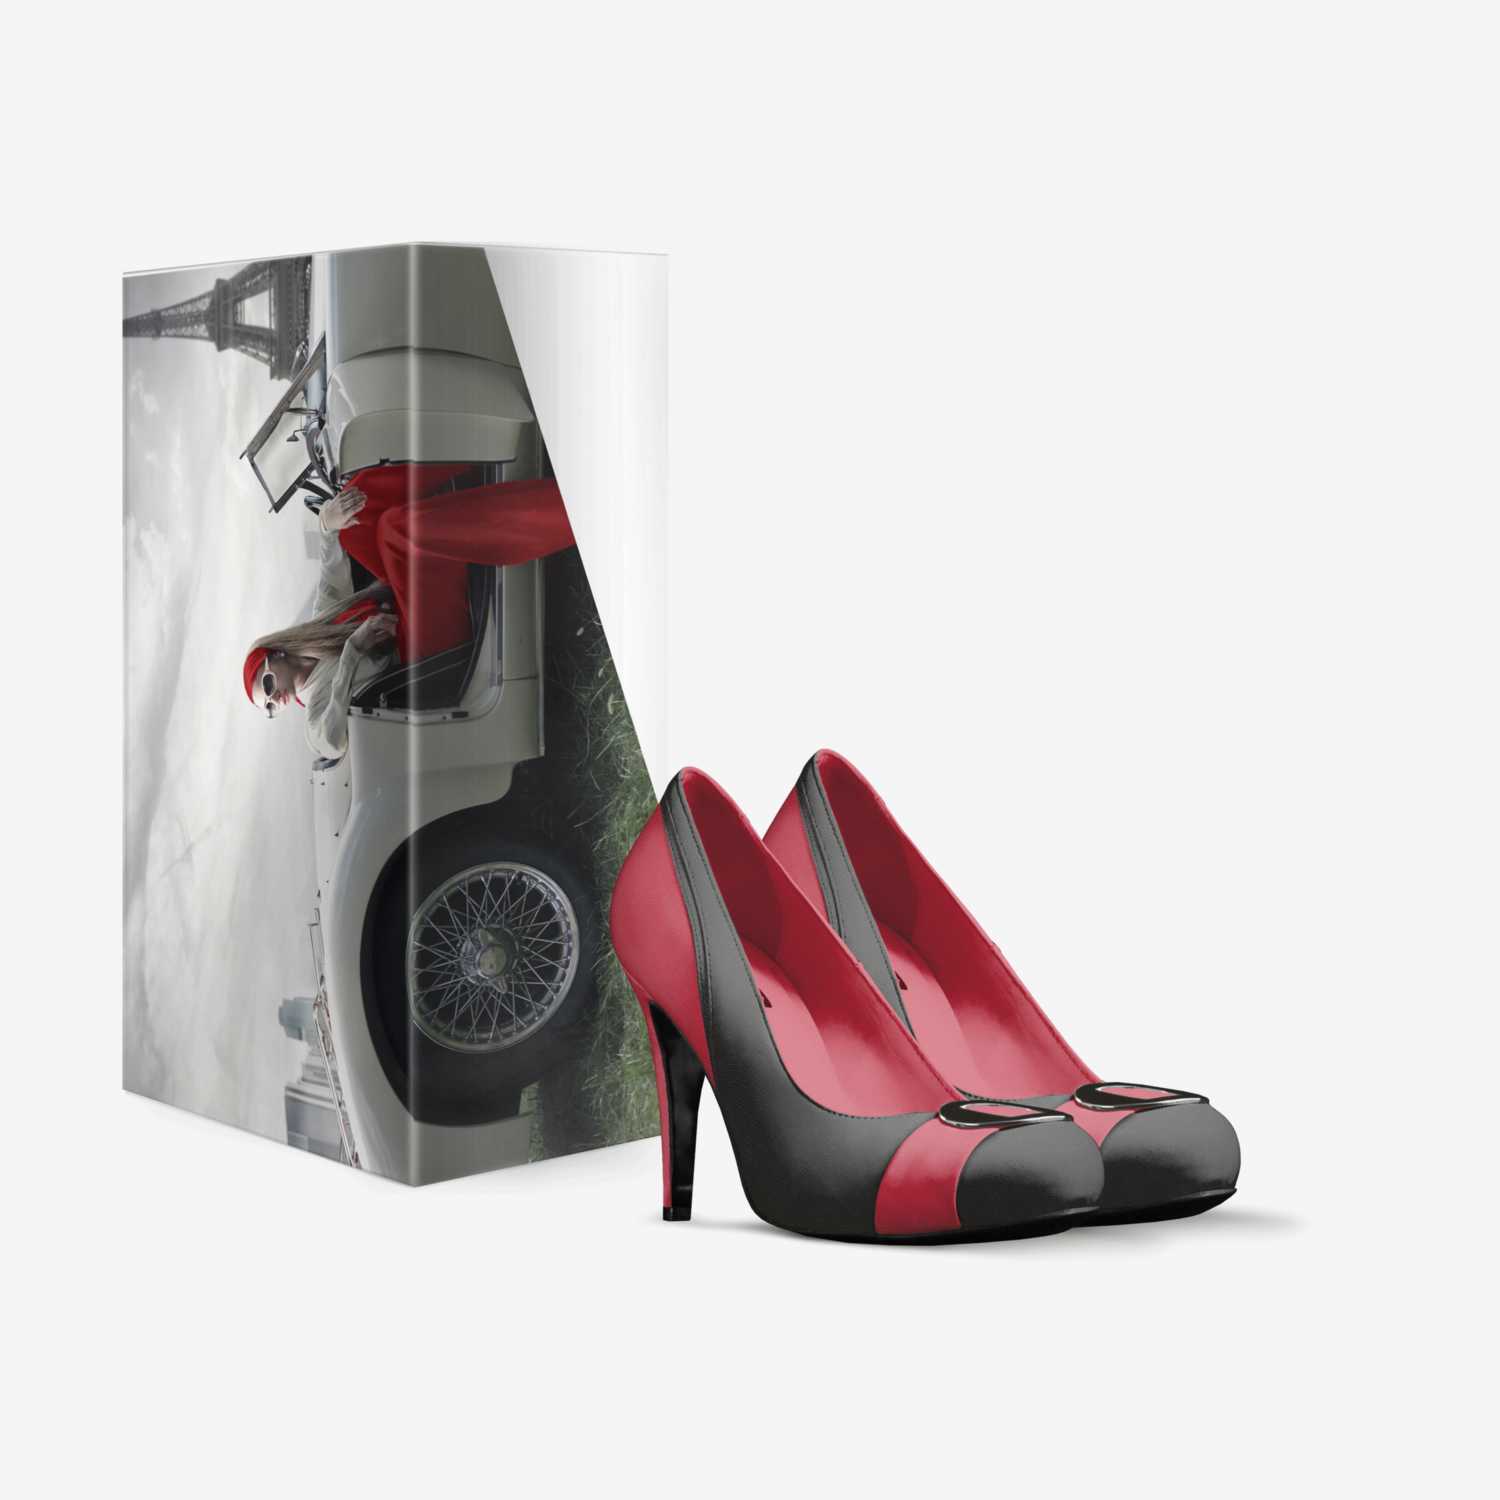 Urbani 2 Women's custom made in Italy shoes by Billy Cariello | Box view